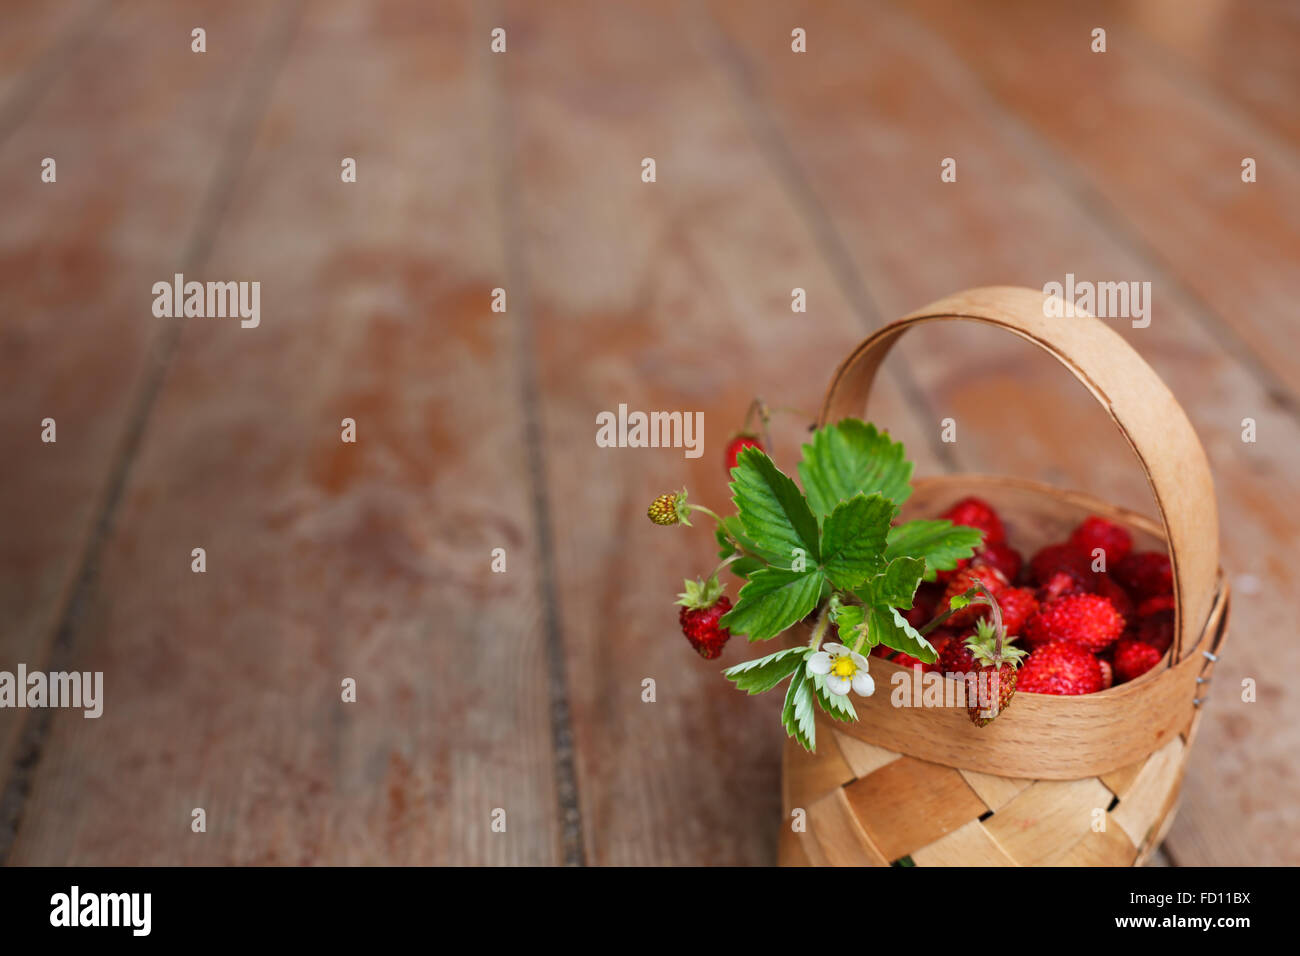 Basket with ripe berries (strawberries) on the background of the wooden floor Stock Photo